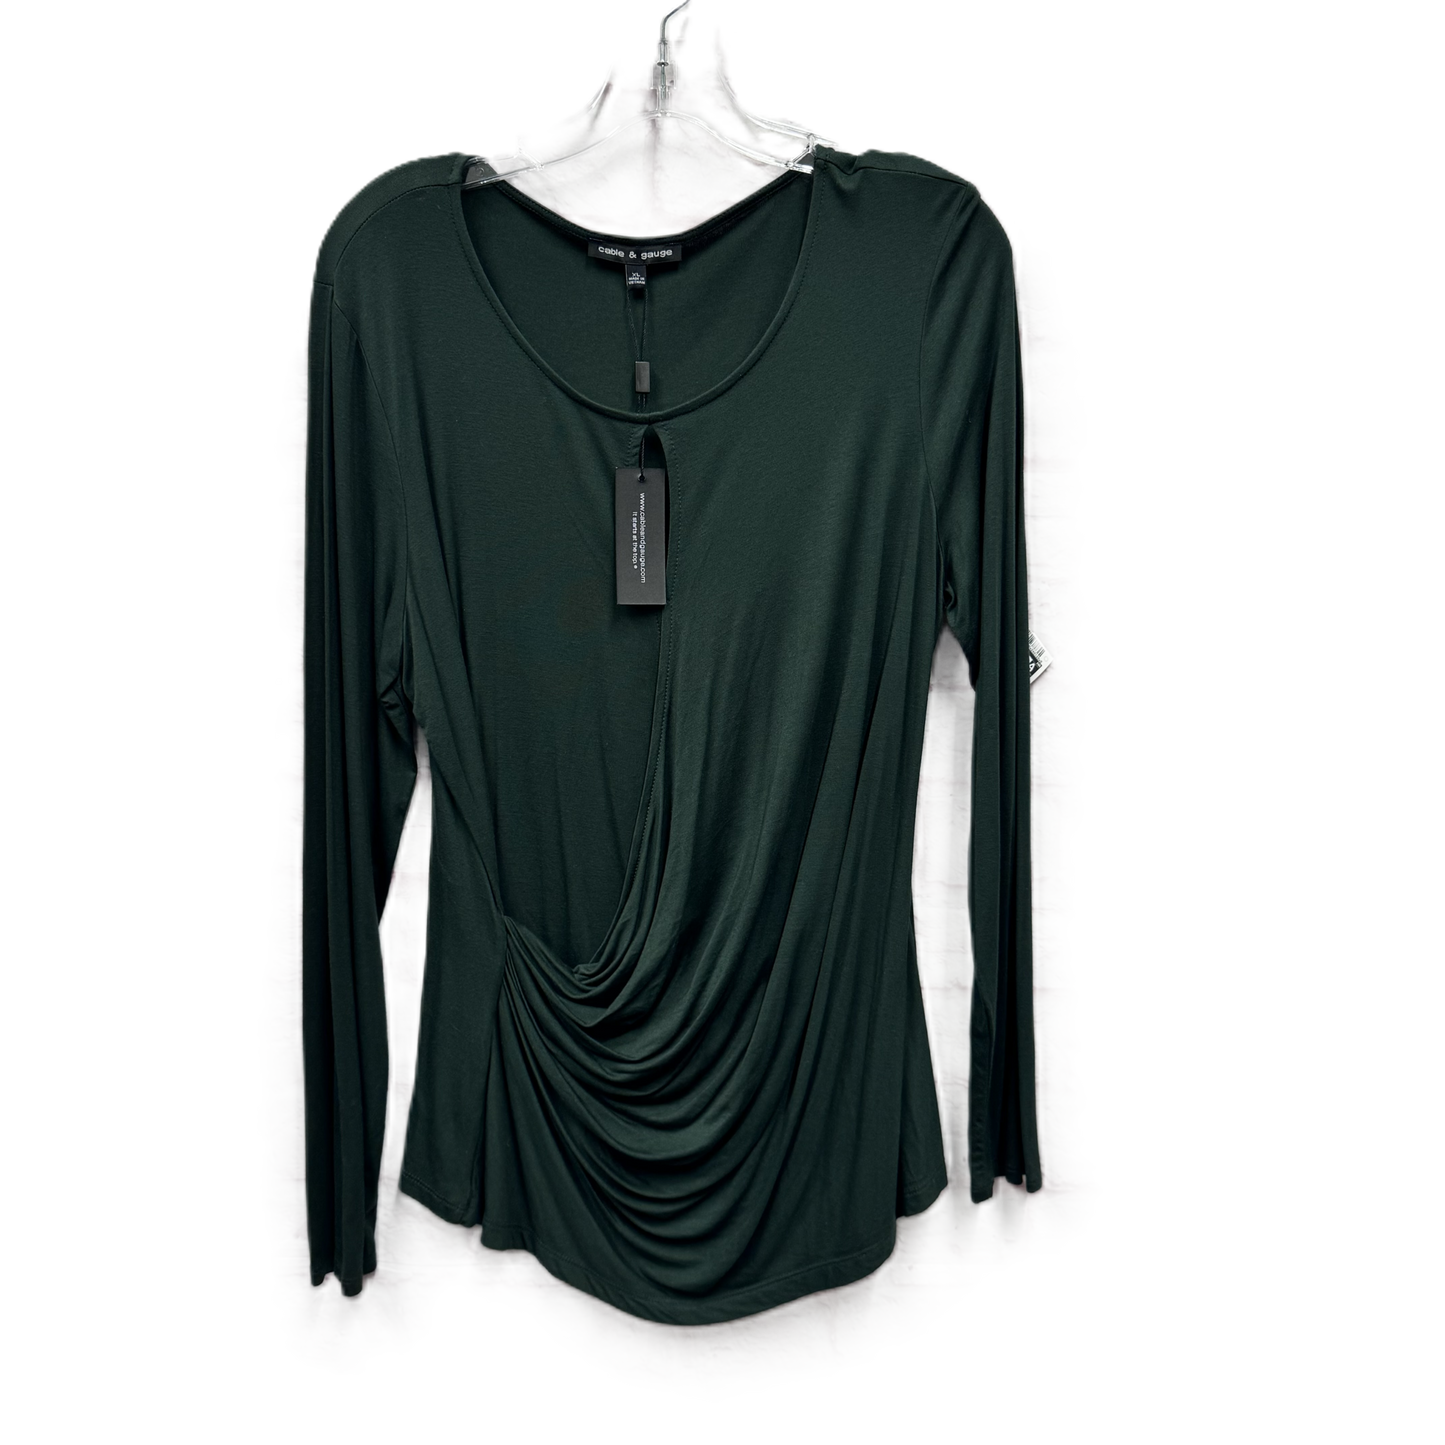 Top Long Sleeve By Cable And Gauge  Size: Xl